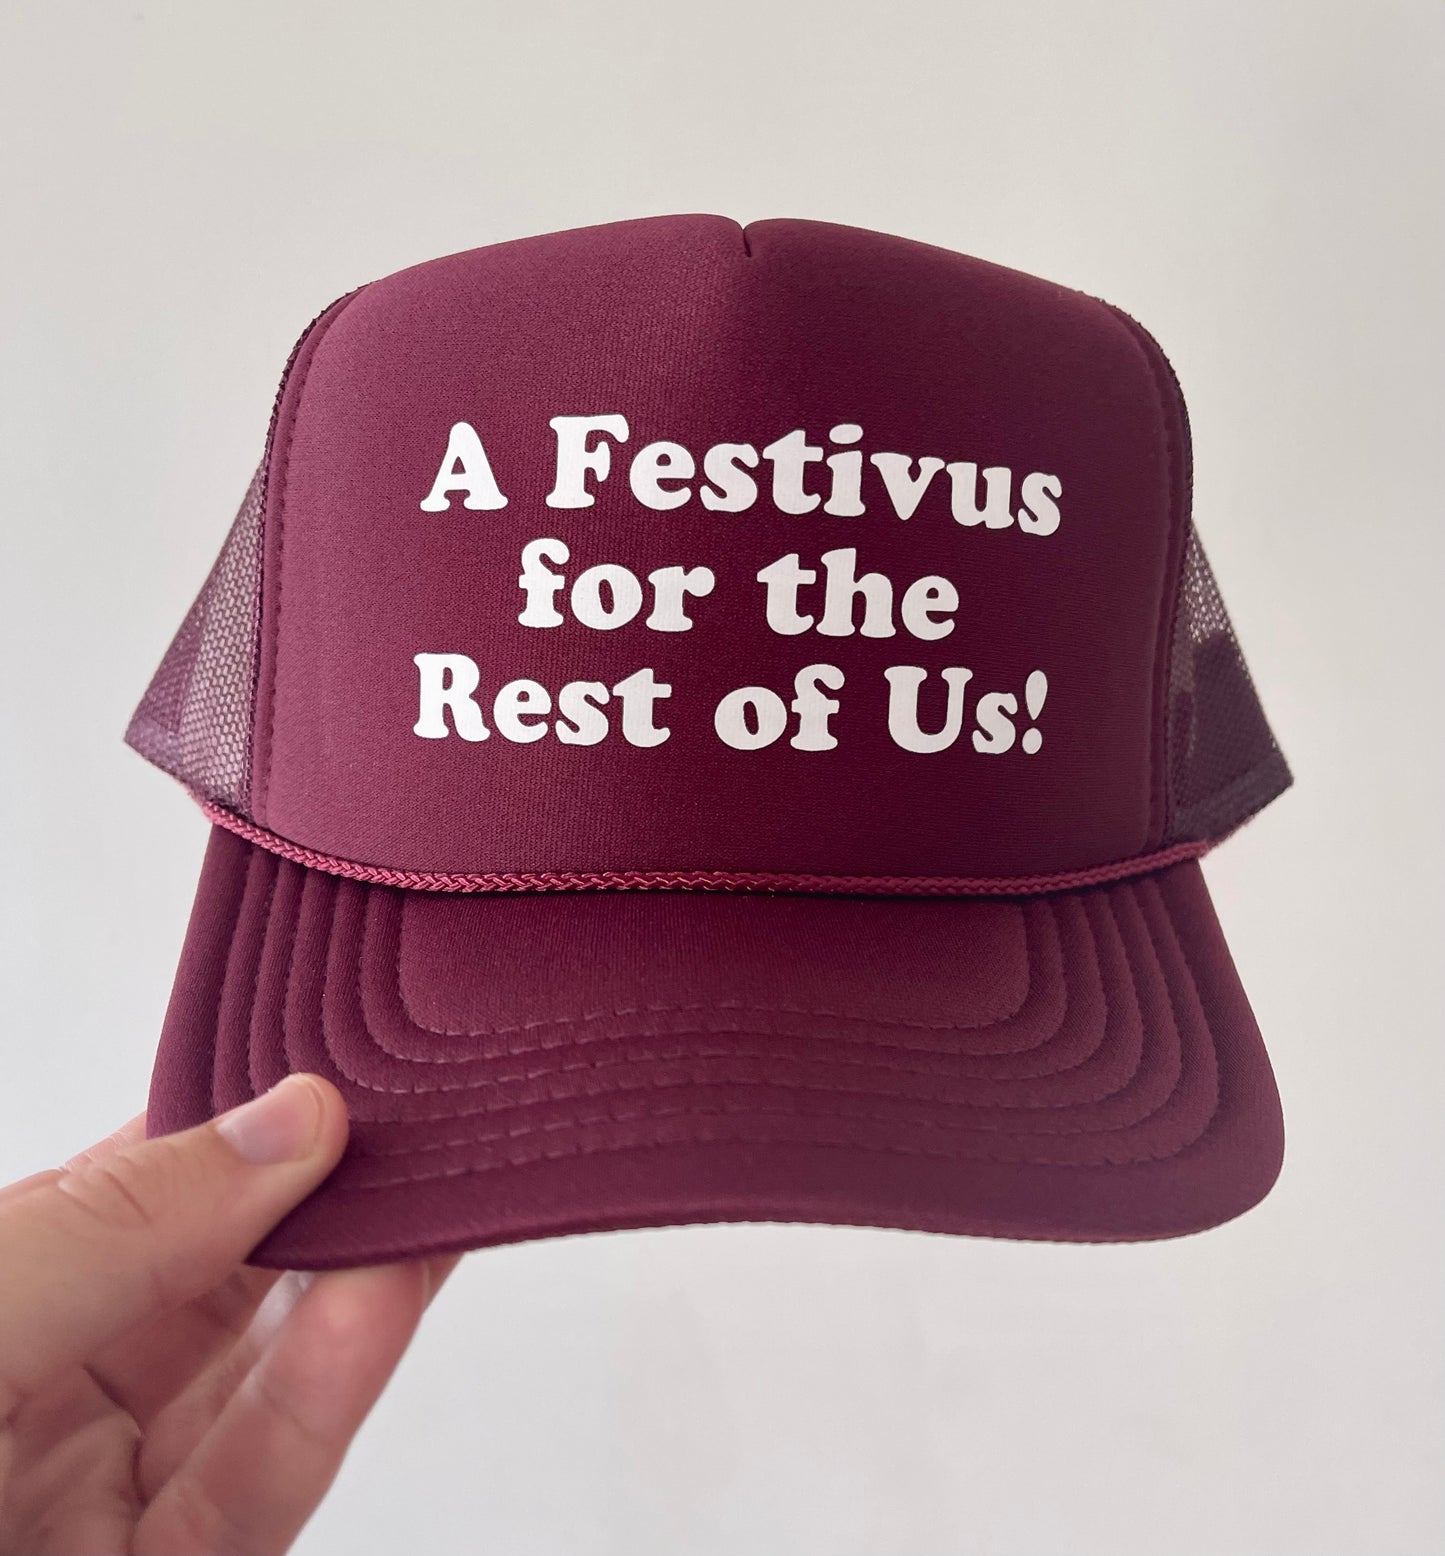 “A Festivus for the Rest of Us!” (Seinfeld)